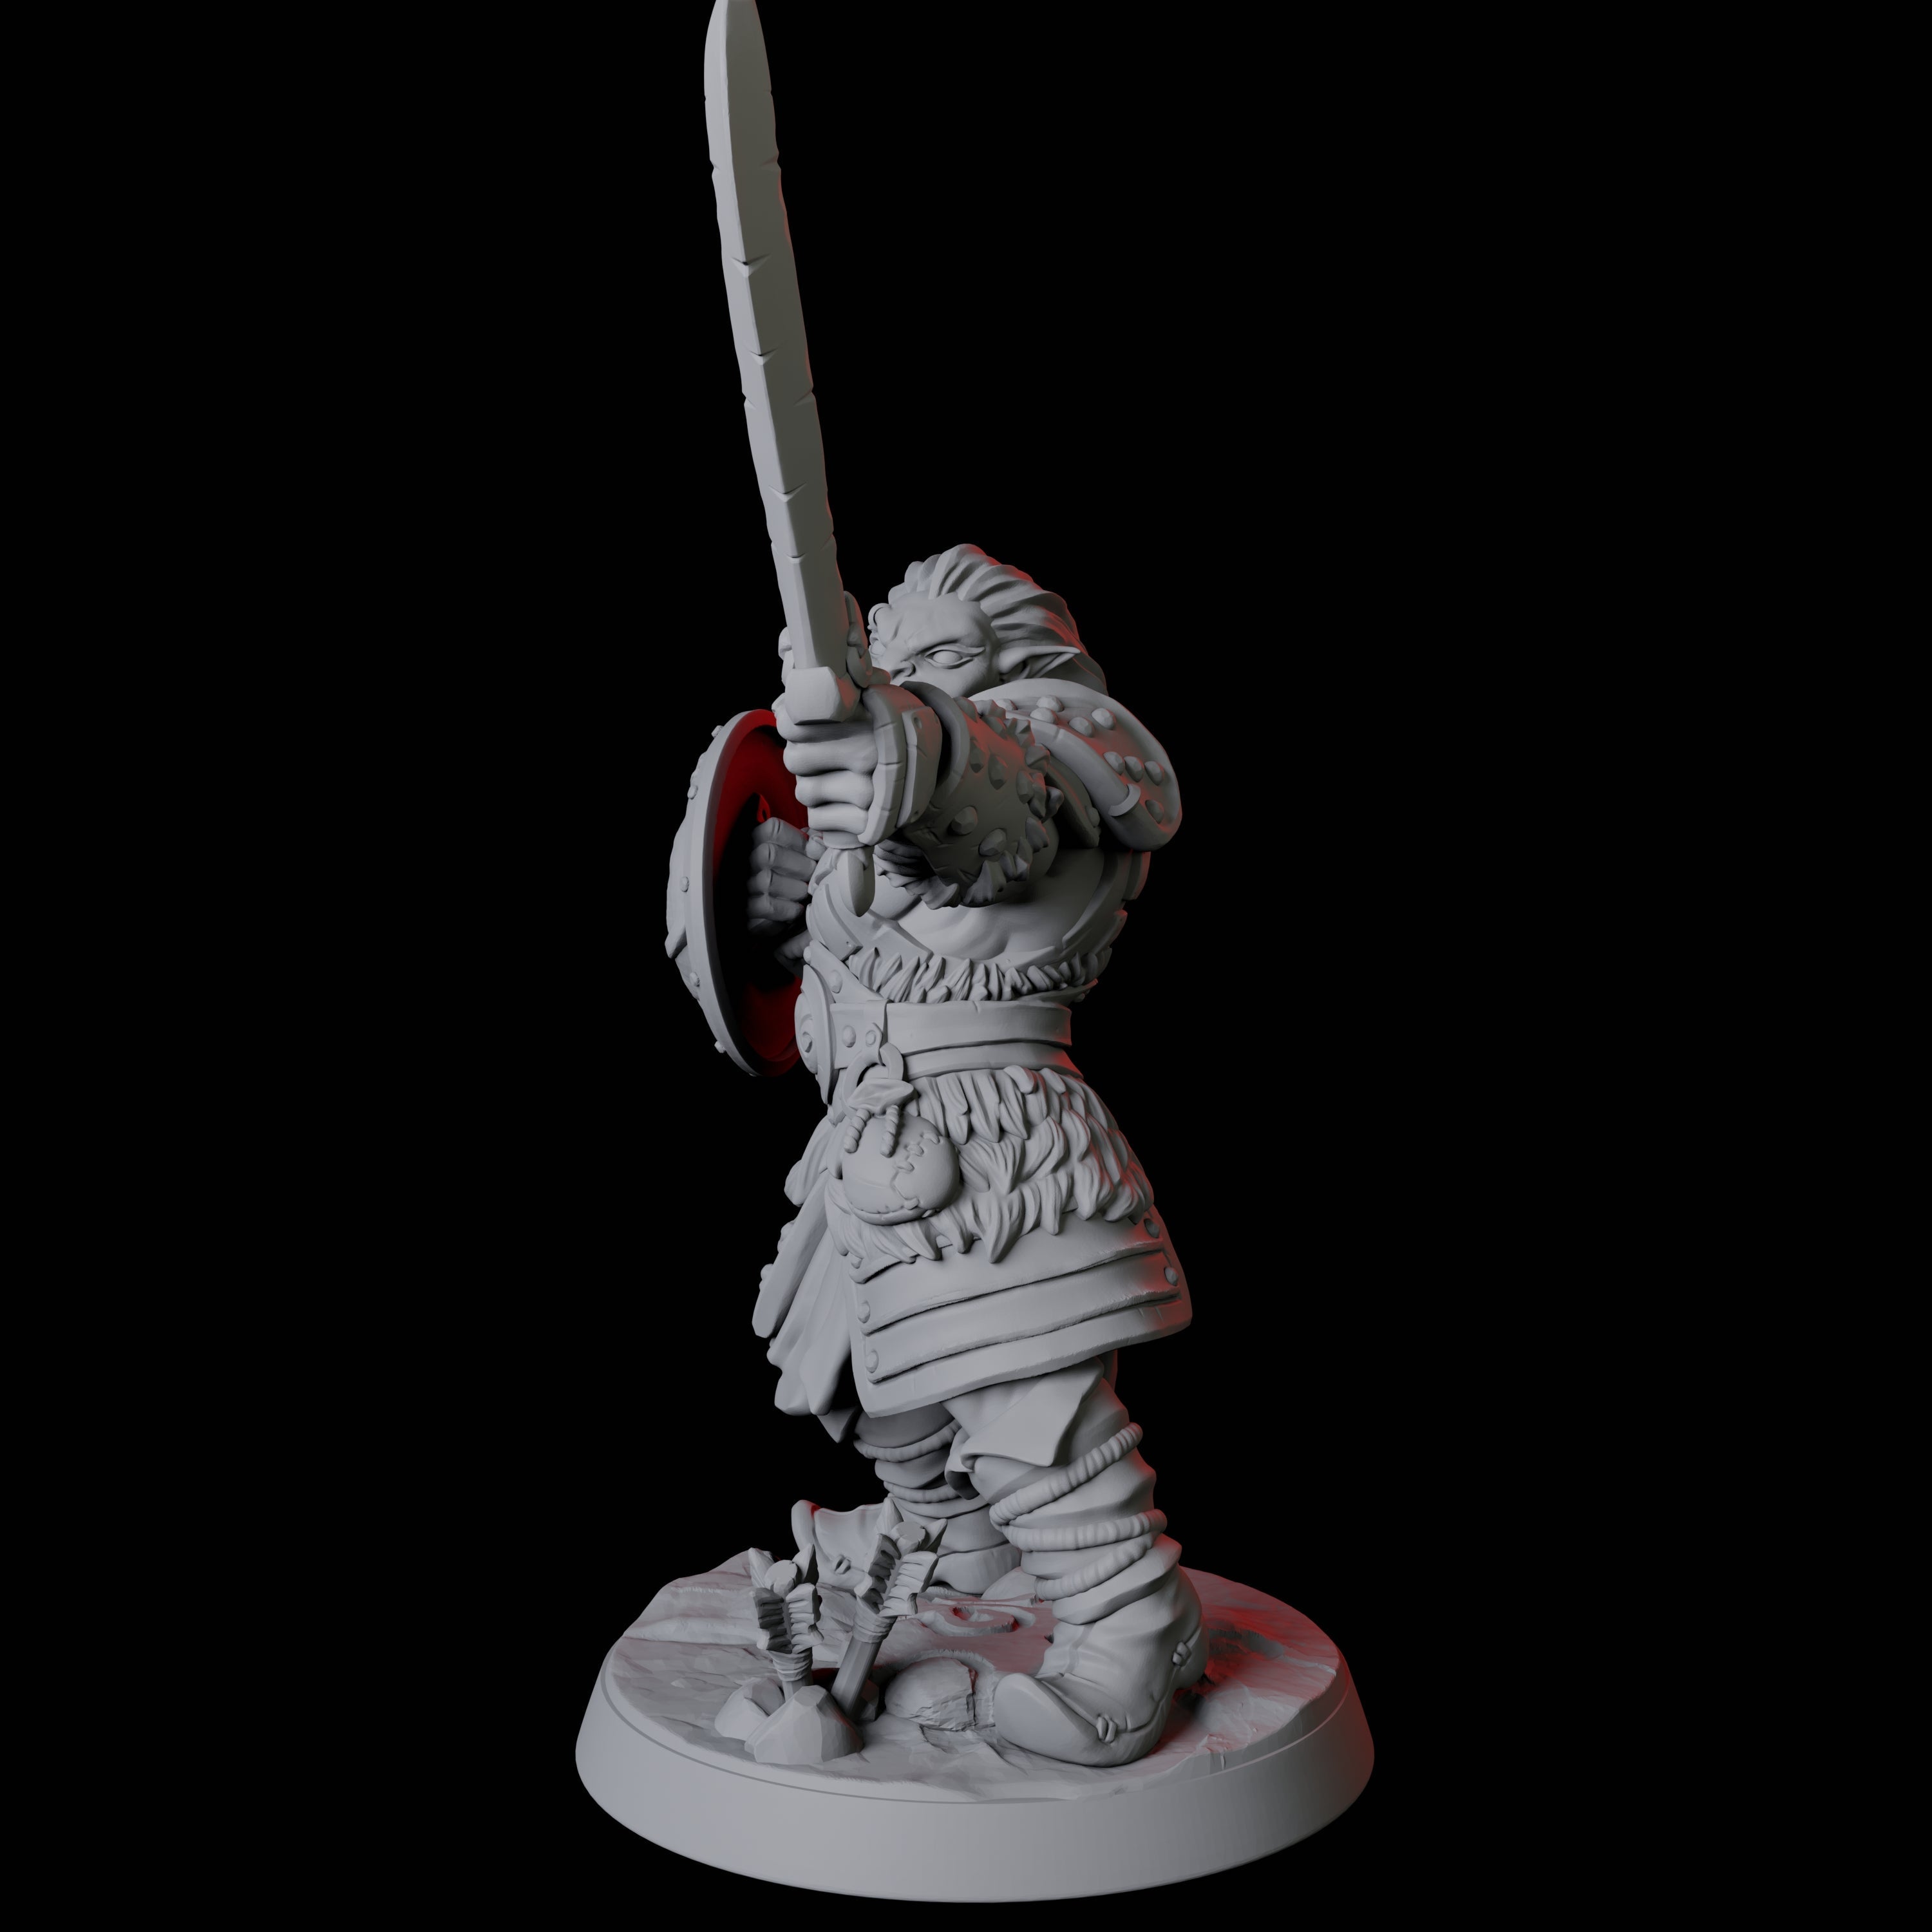 Mountain Orc Warrior E Miniature for Dungeons and Dragons, Pathfinder or other TTRPGs